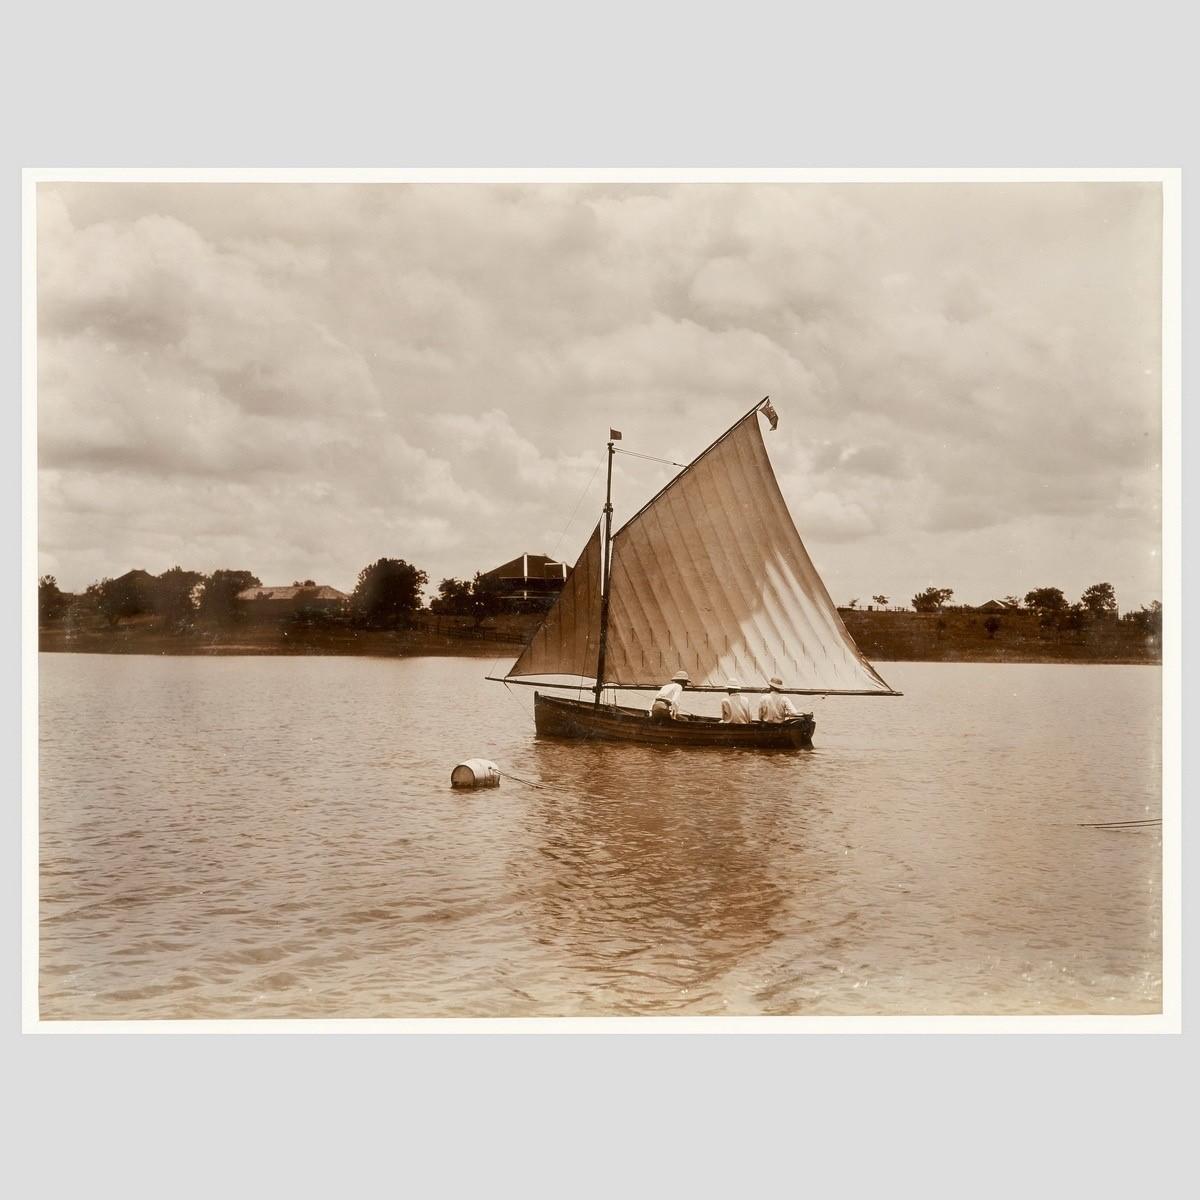 A rare framed Albumen print of a dinghy with 3 gentlemen sailing off the coast of Jamaica. Attributed to John Valentine,

circa 1910
Measures: 16 x 18 1/2”.